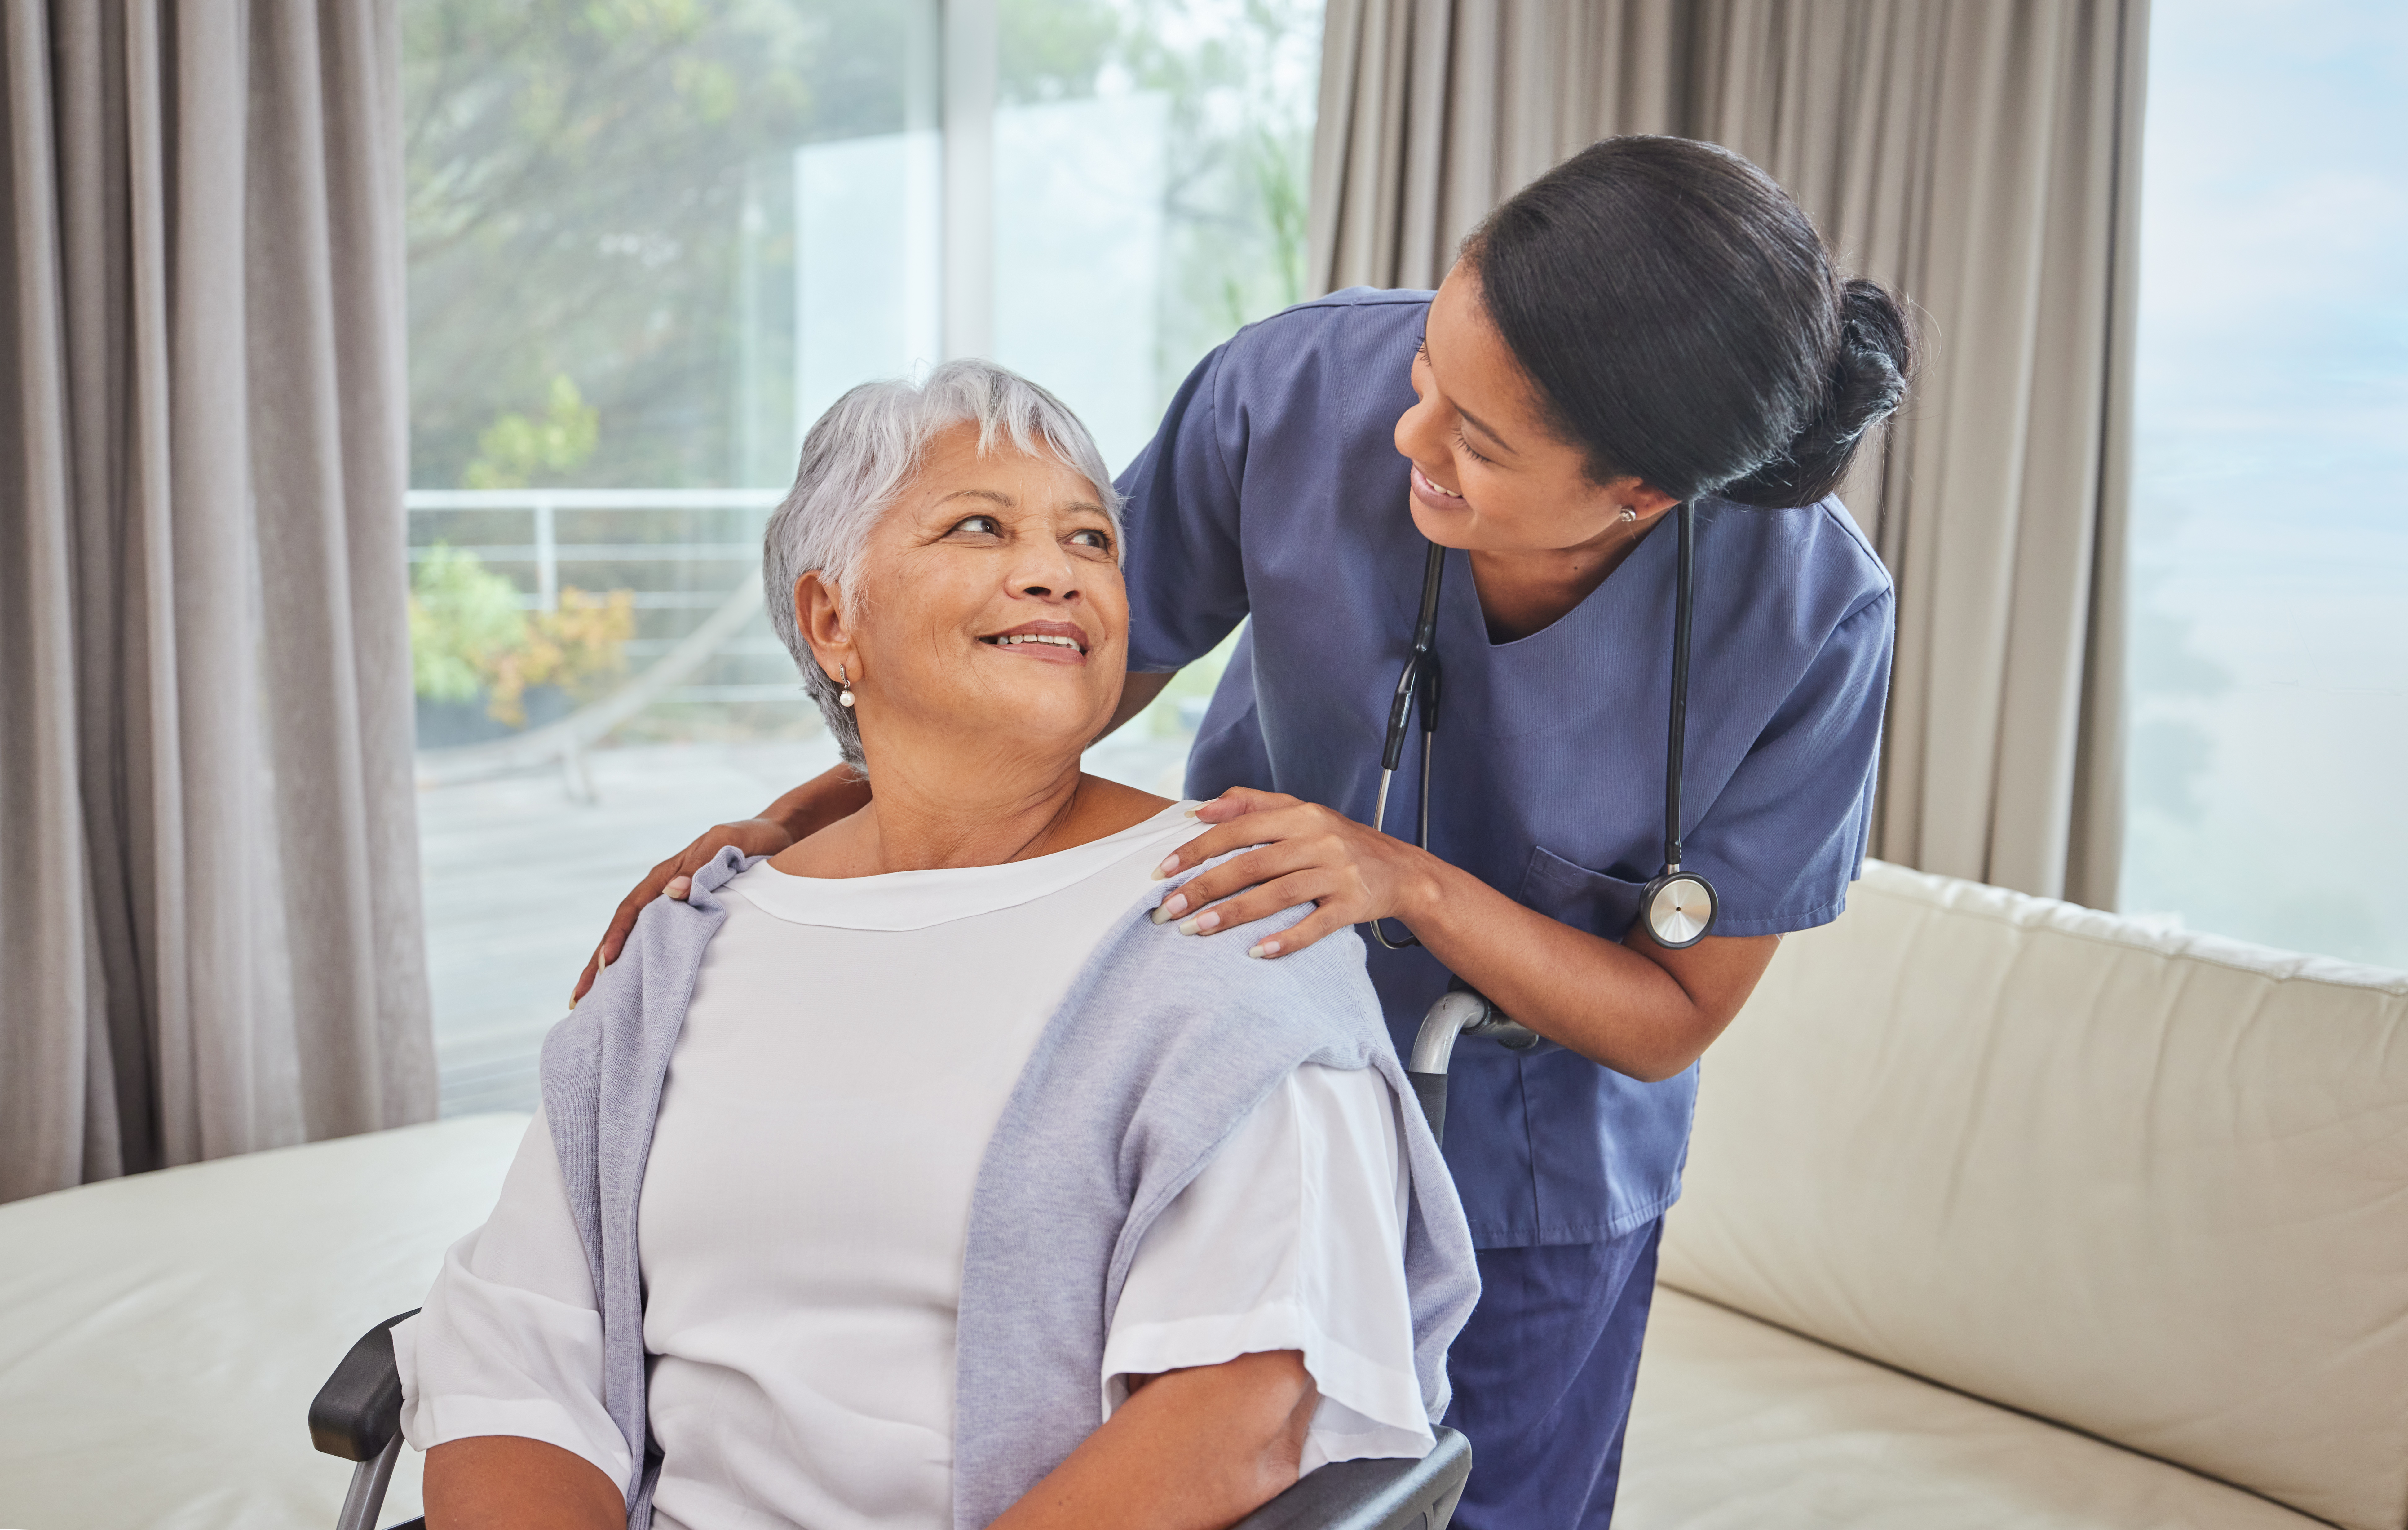 A senior being assisted by a nurse in an assisted living facility.